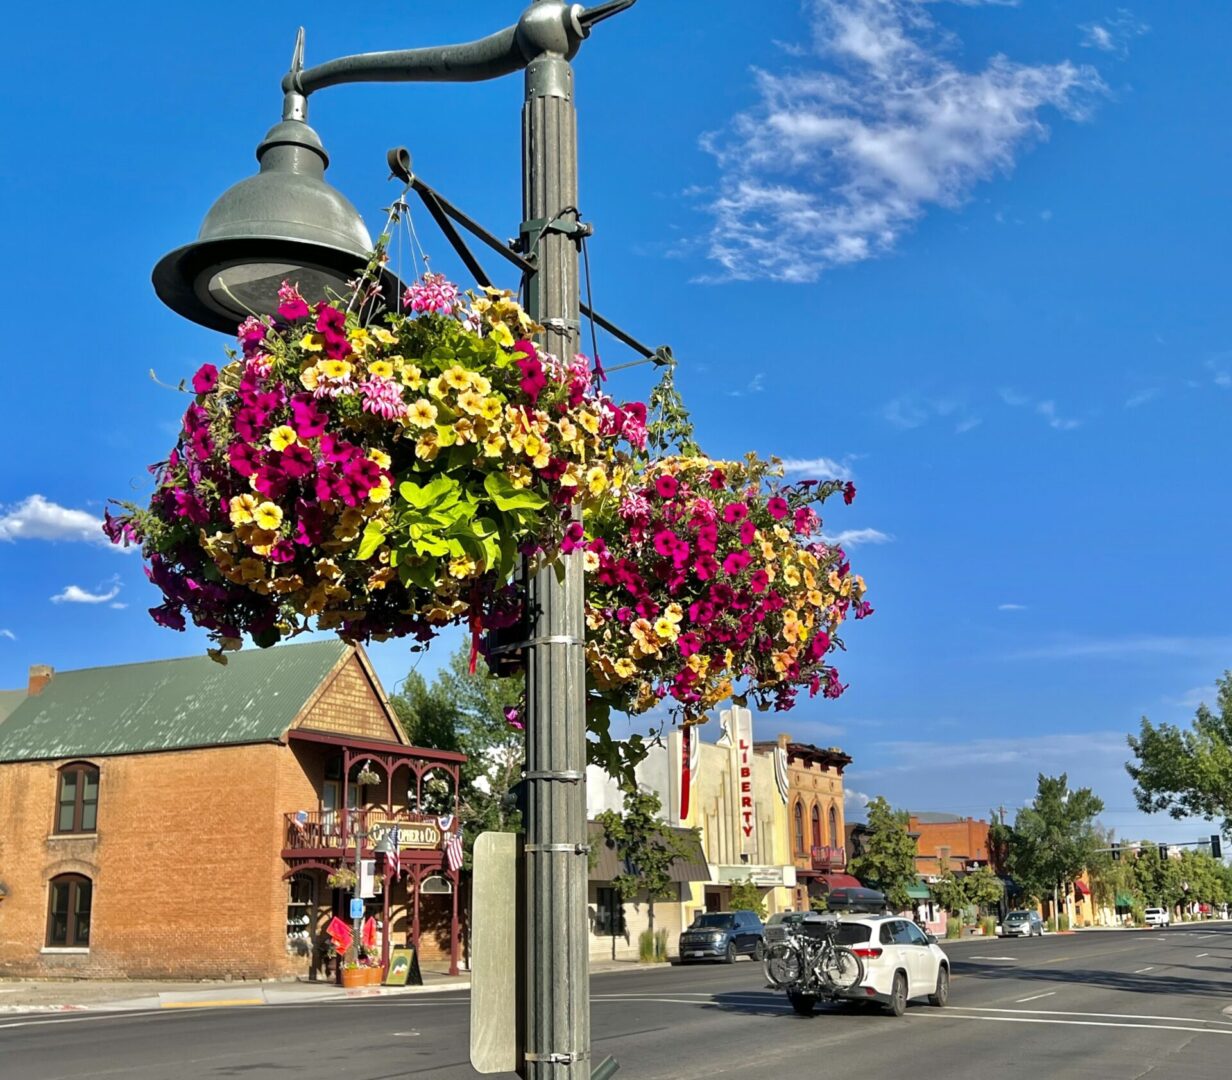 Flowers - street scape with baskets_Hailey.Credit Carol Waller